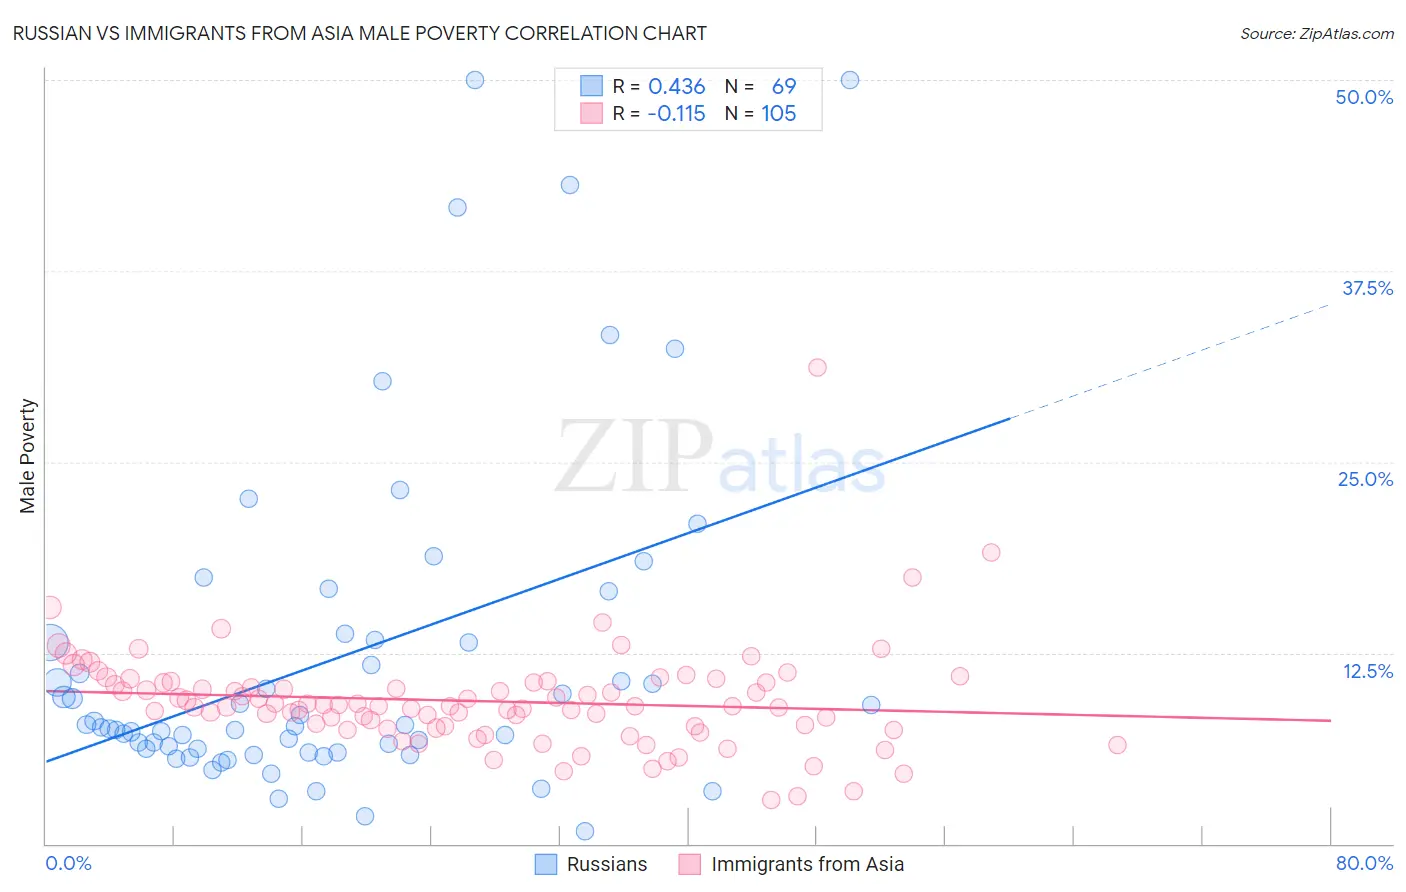 Russian vs Immigrants from Asia Male Poverty